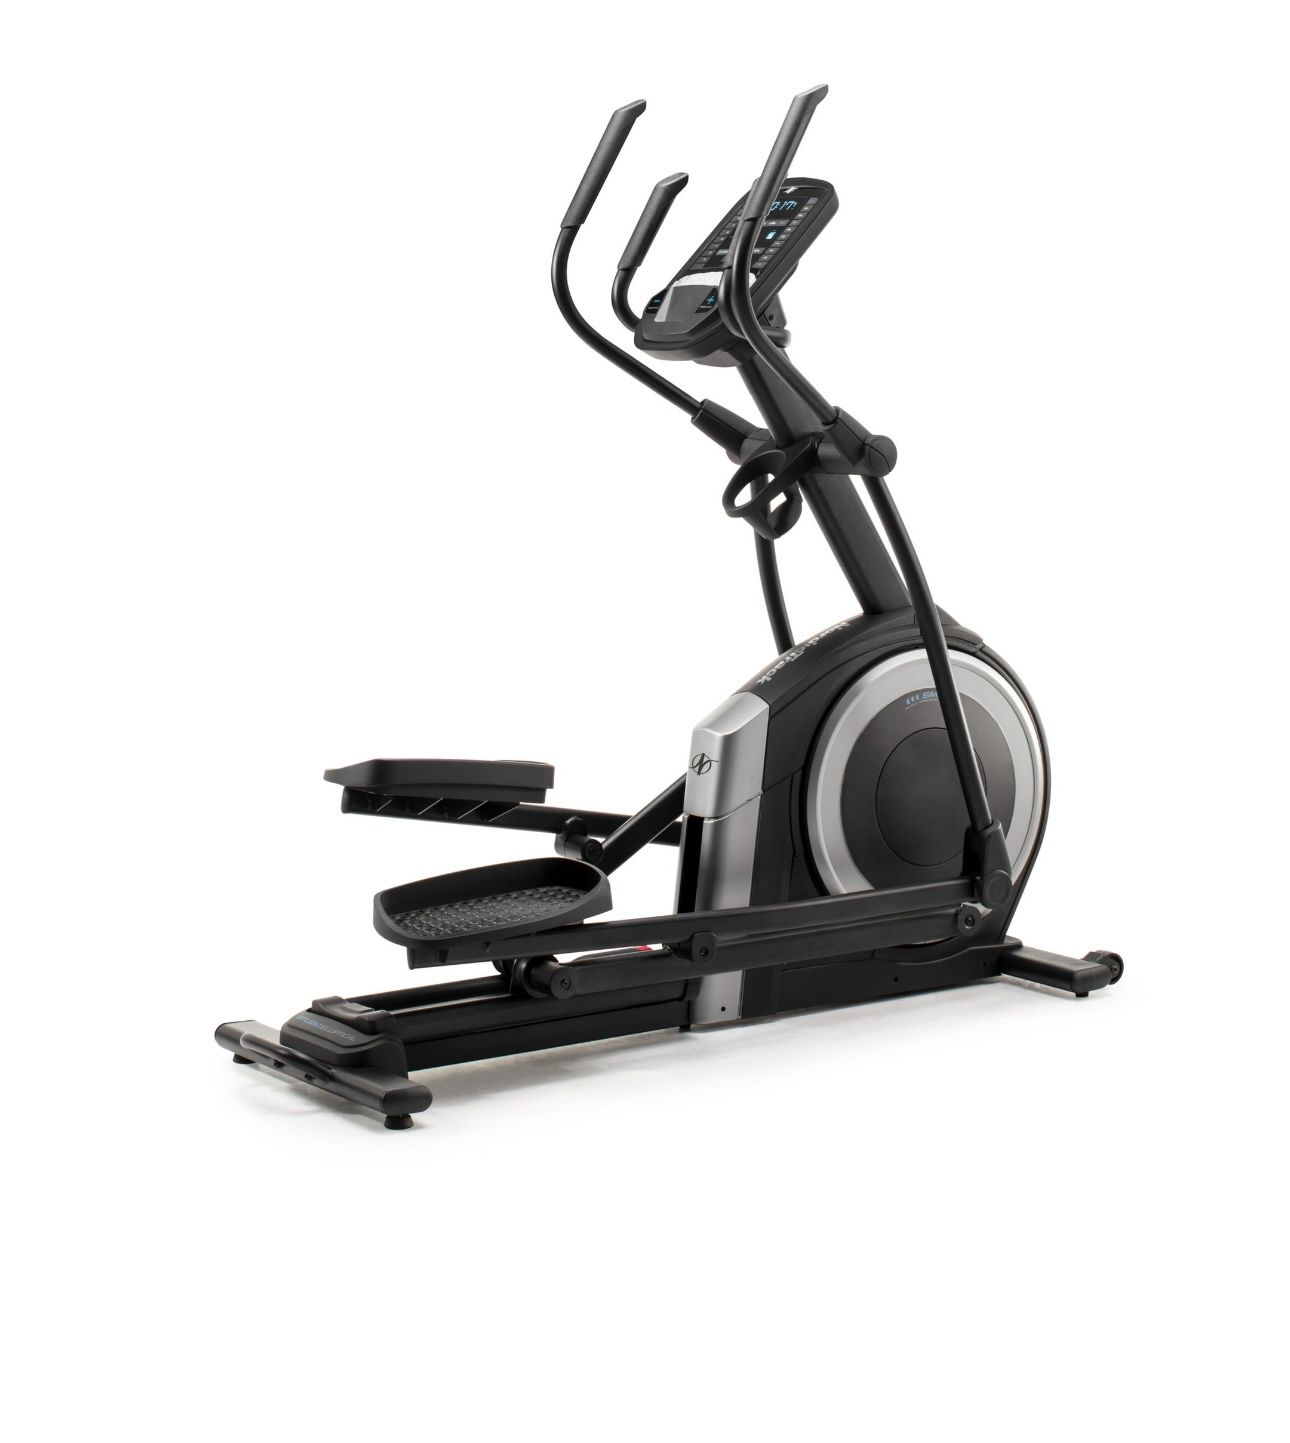 NordicTrack Studio Smart Elliptical with 20 Digital Resistance Levels, Compatible with iFIT Personal Training